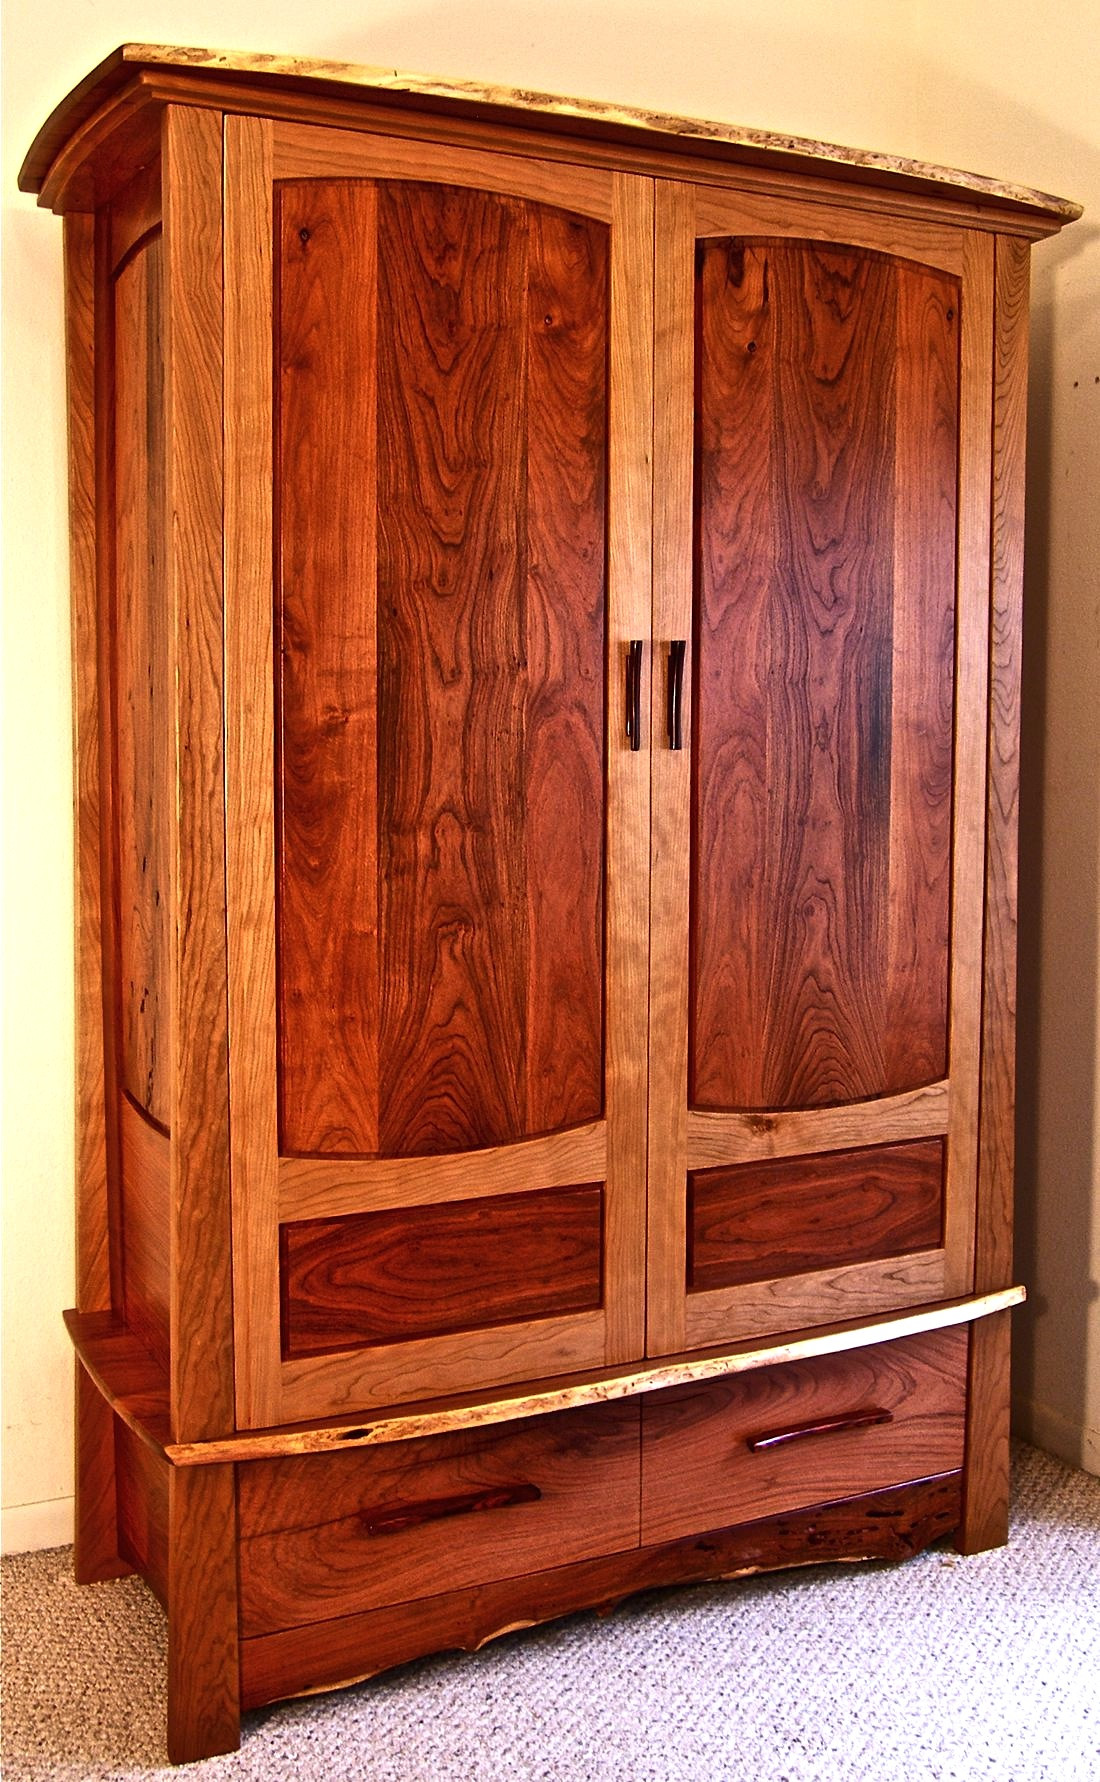 DIY Armoire Plans
 DIY Shaker Armoire Plans Wooden PDF wood clamping systems